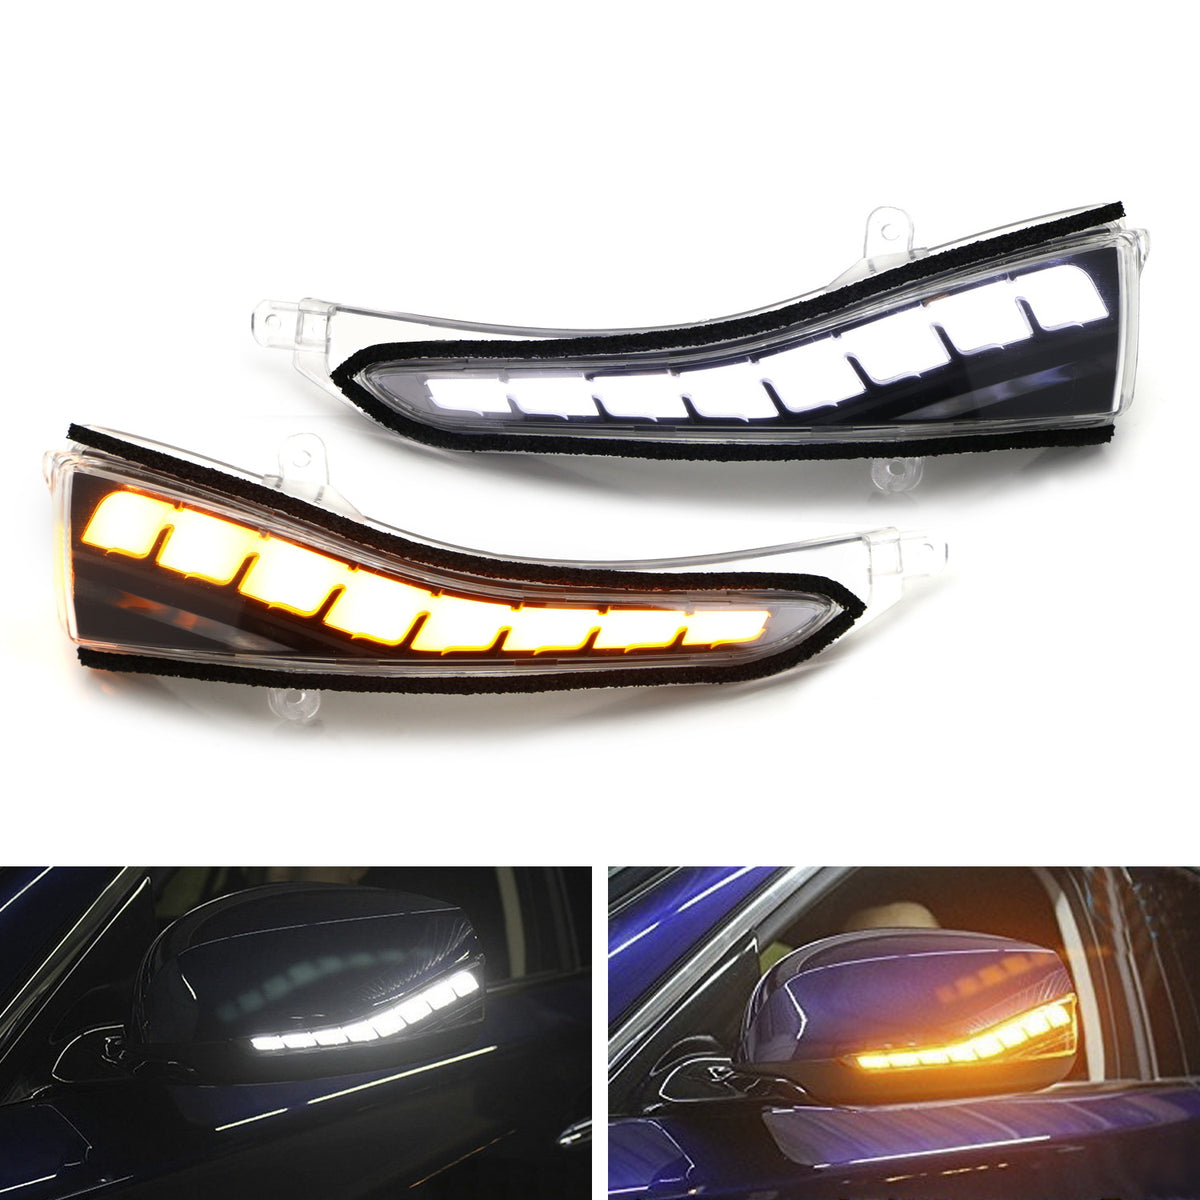 Auto LED Turn Signal Light DRL Rearview Dynamic LED Side Mirror